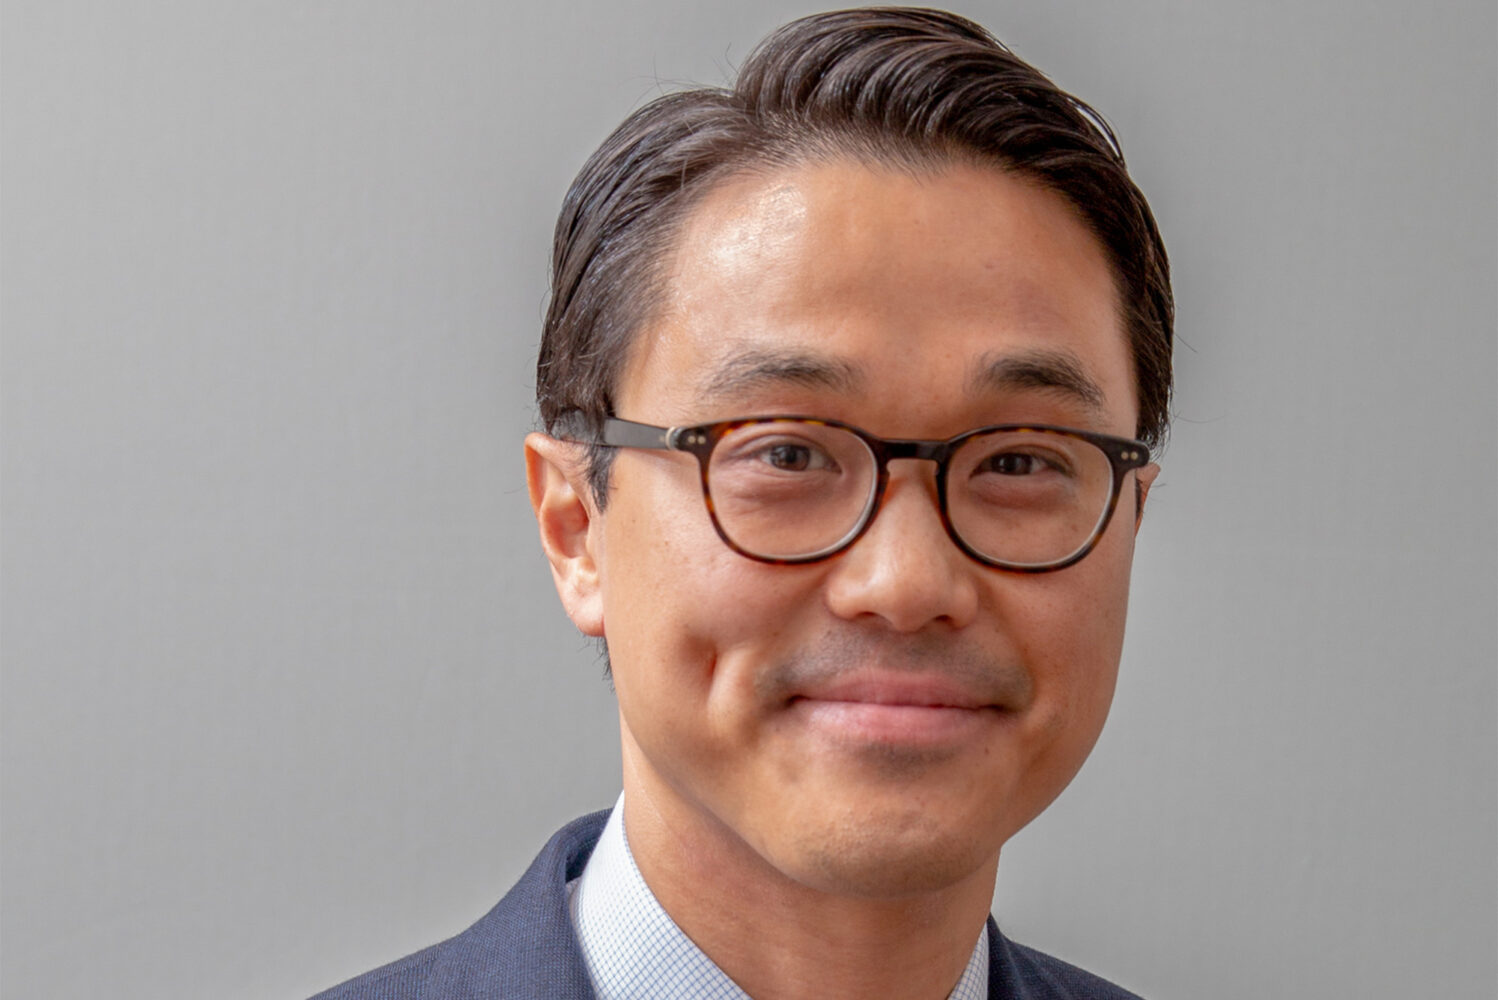 Photo: An asian man wearing a collared shirt and suit with glasses and a soft smile